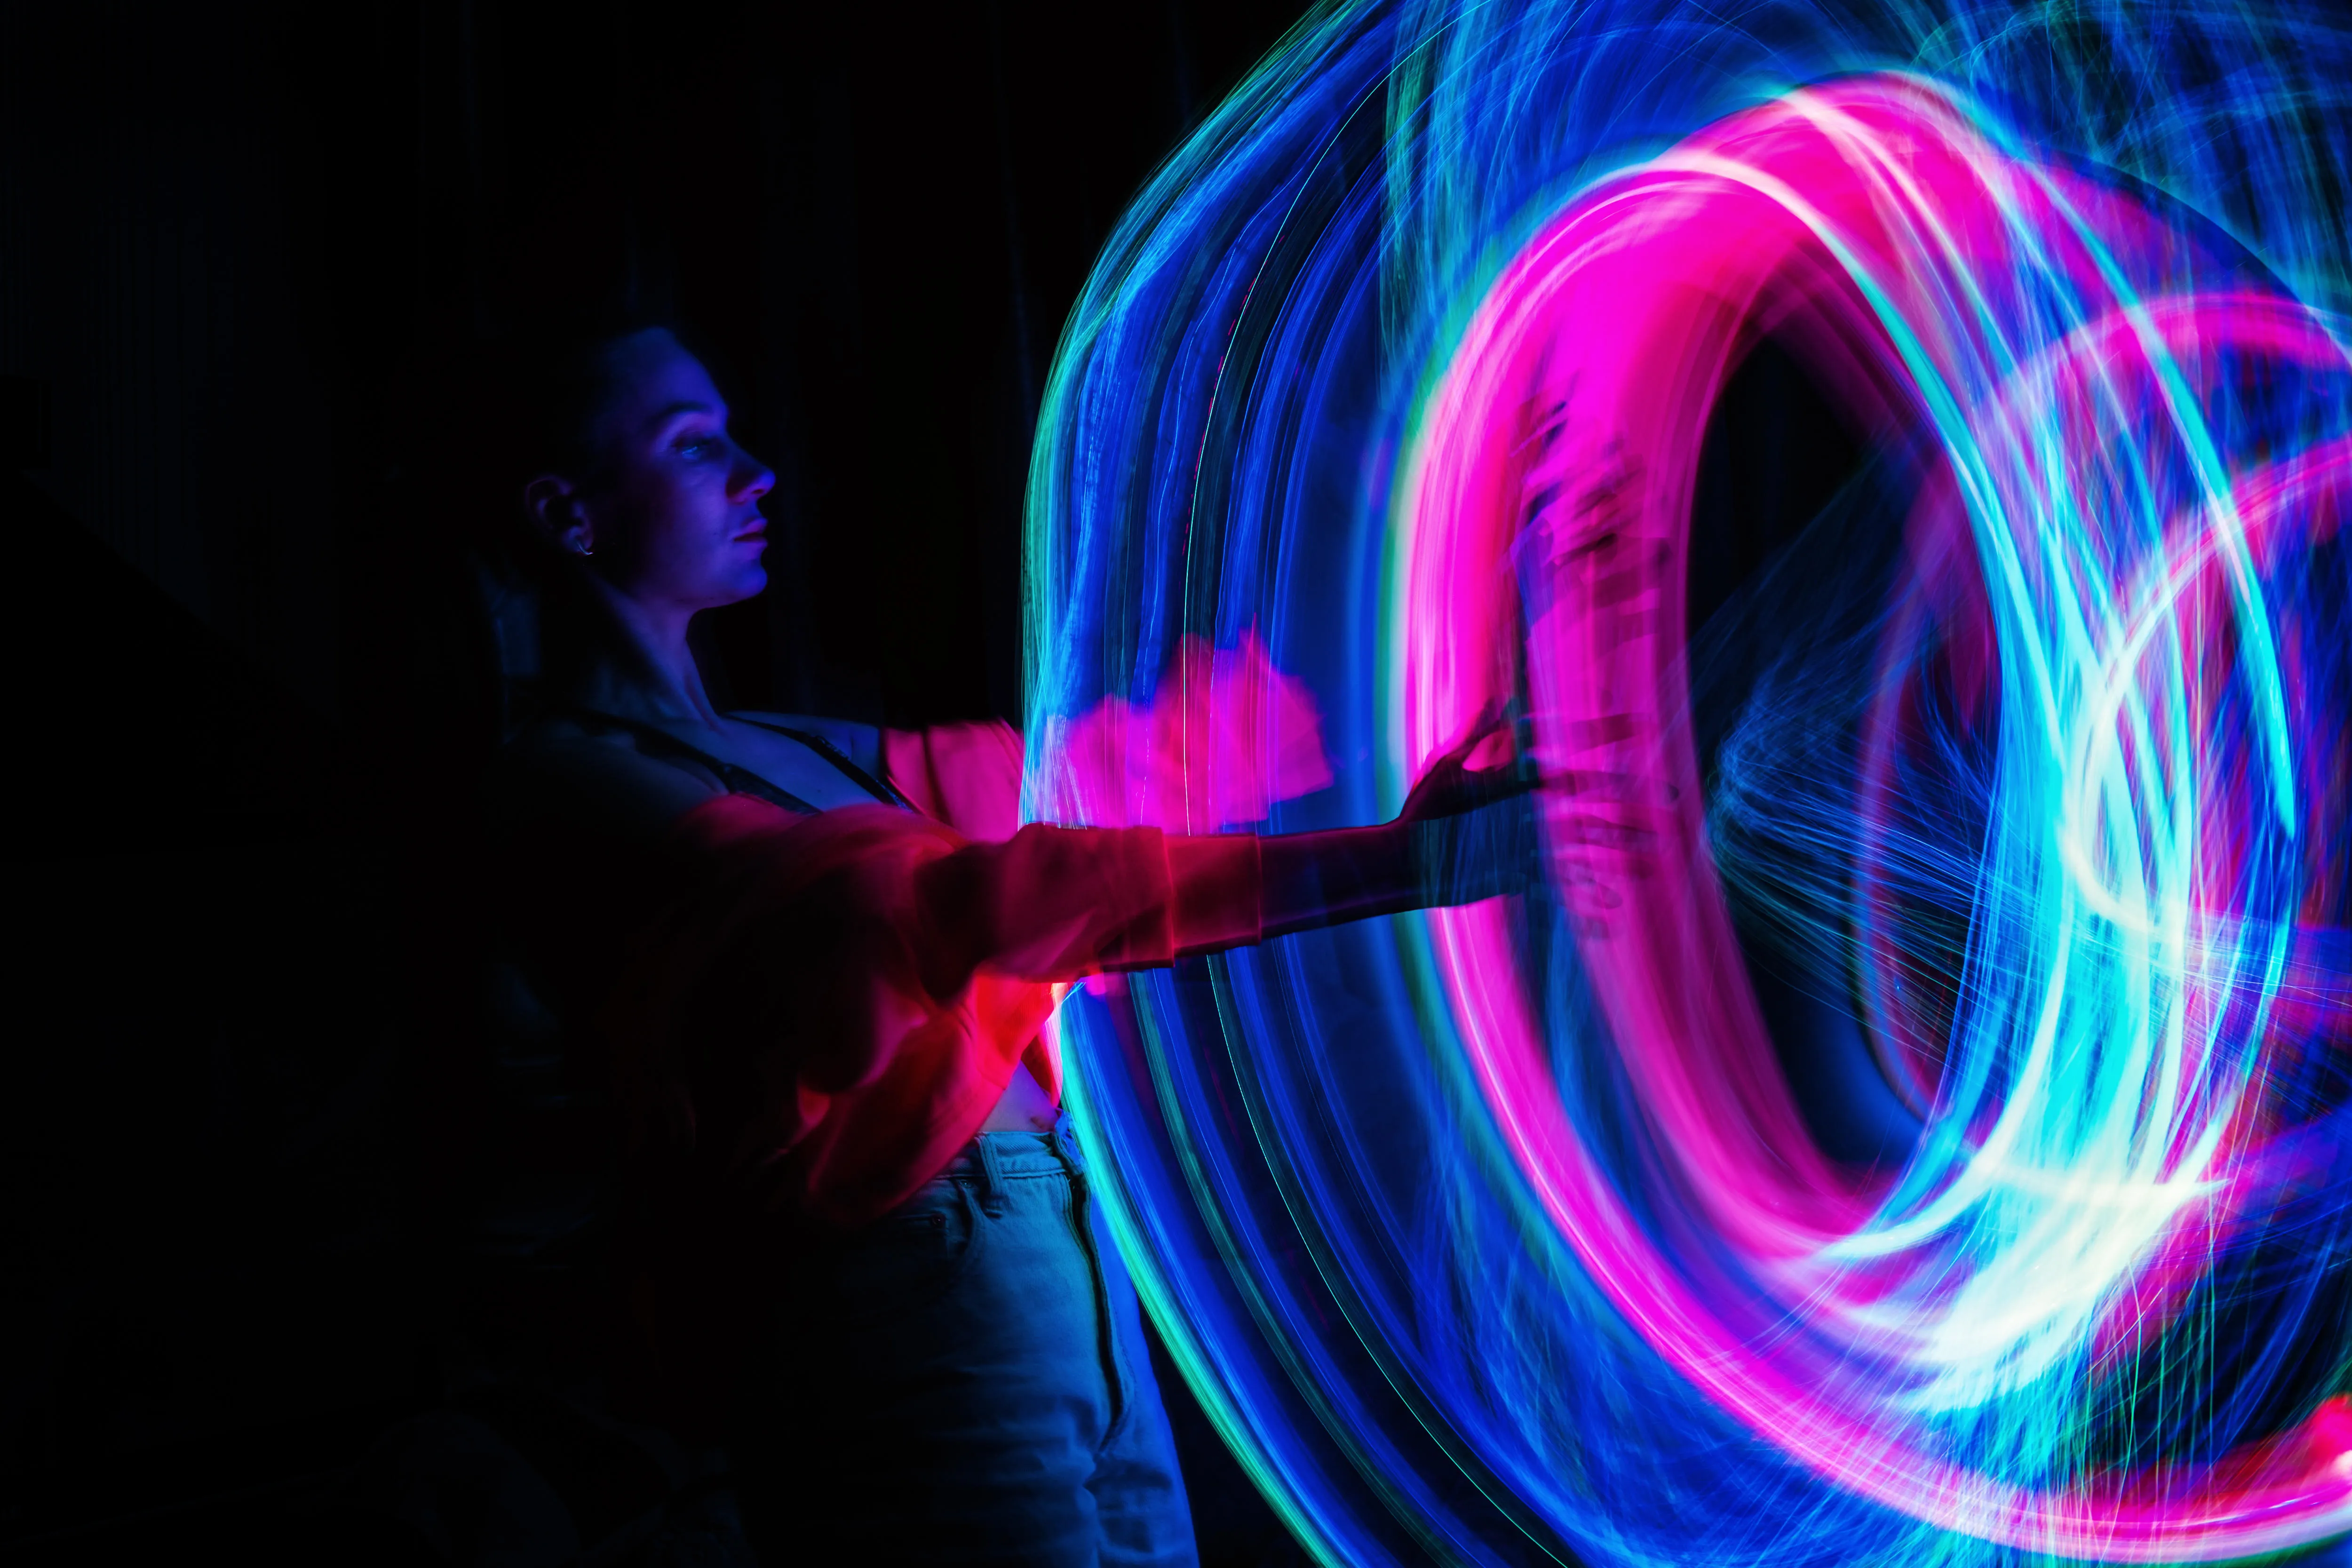 A woman stands in the dark embracing a swirl of vibrant neon colours in shades of pink and blue.